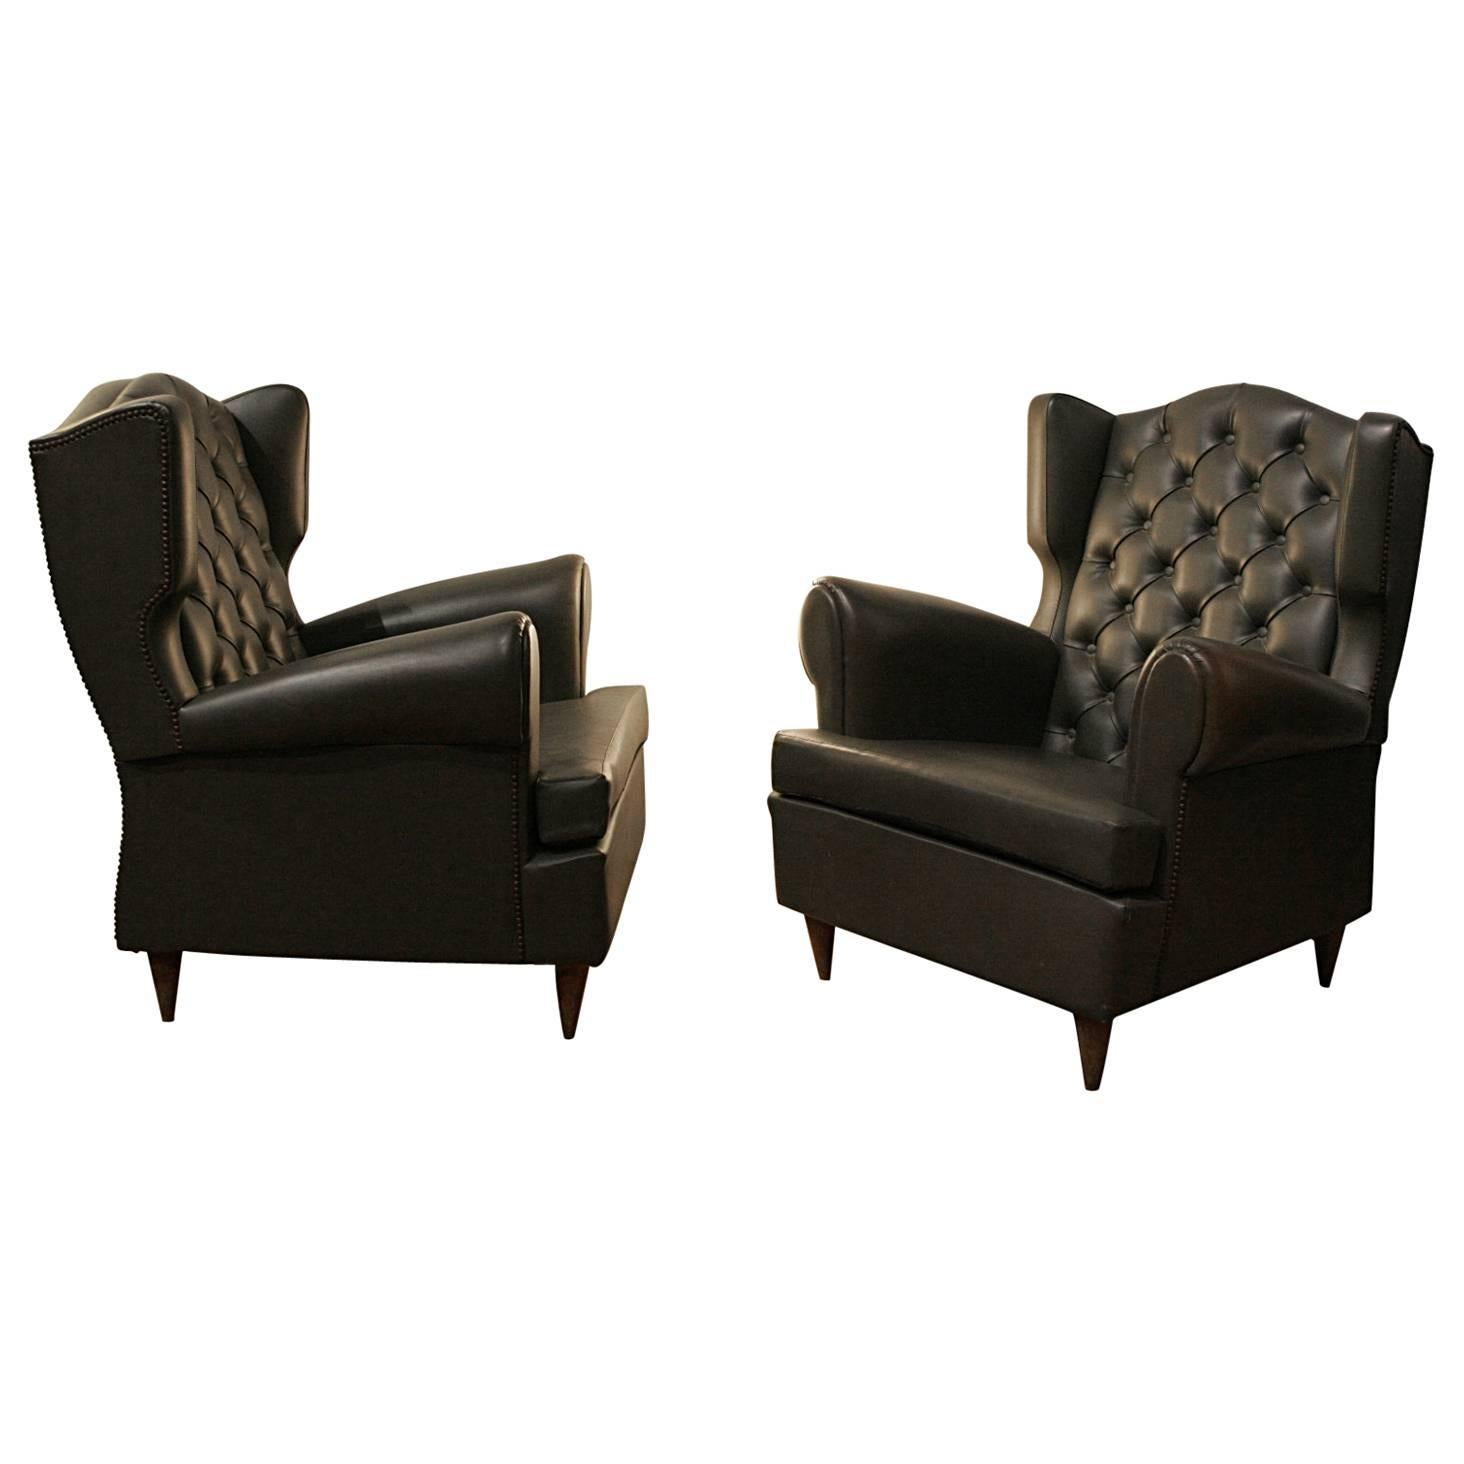 Neoclassic Pair of Armchair, 1960 For Sale